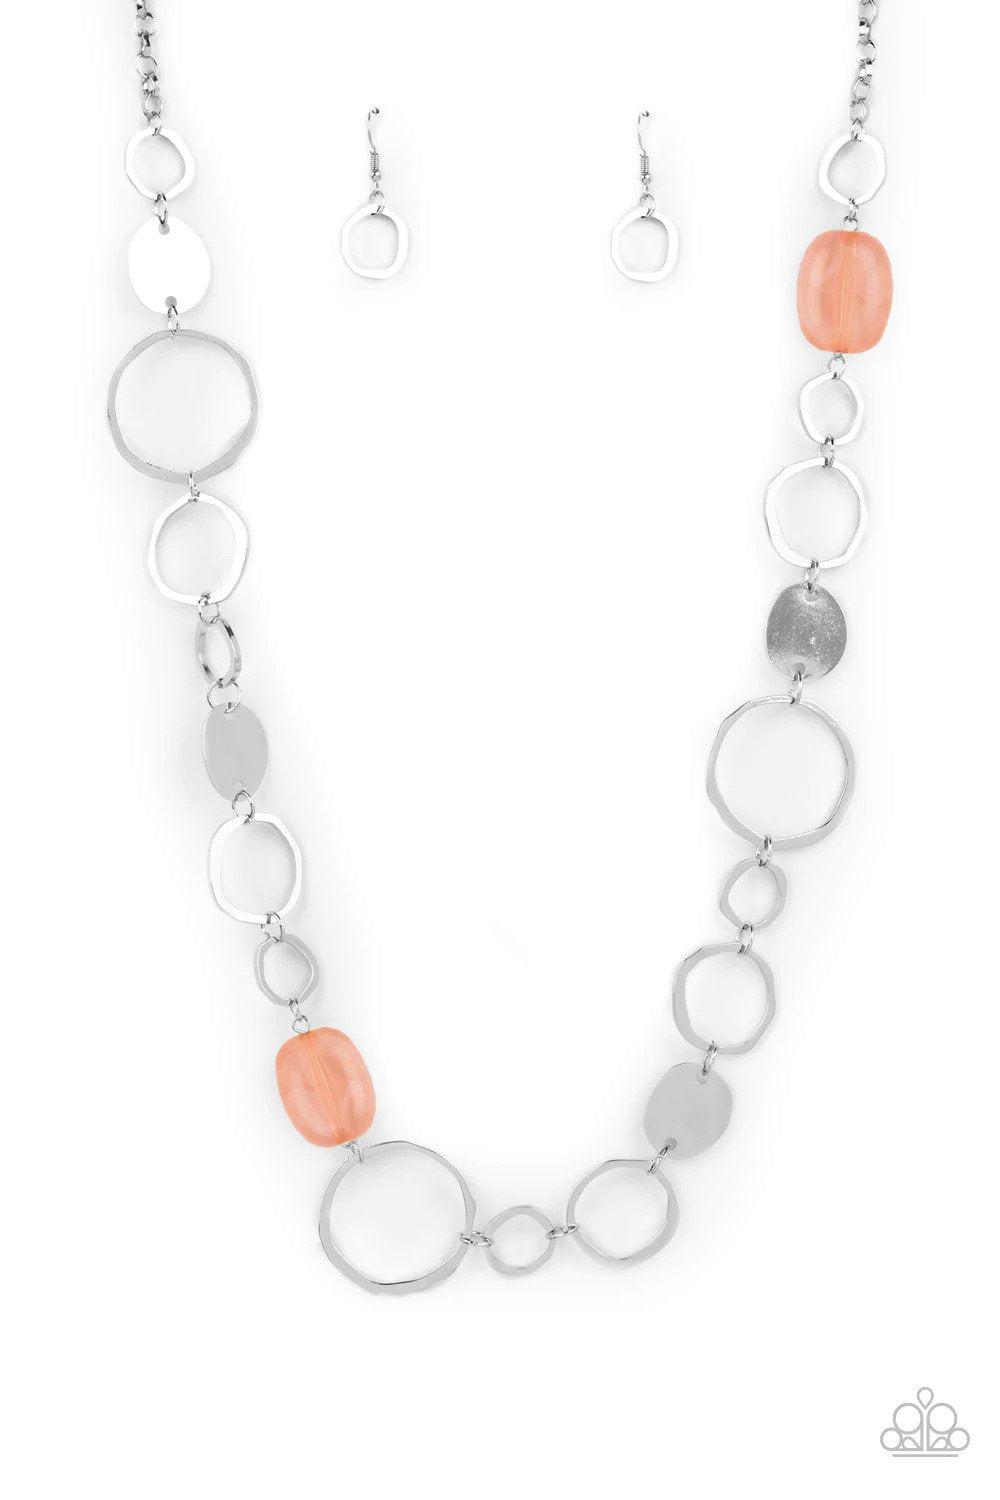 Colorful Combo Orange Necklace - Paparazzi Accessories- lightbox - CarasShop.com - $5 Jewelry by Cara Jewels